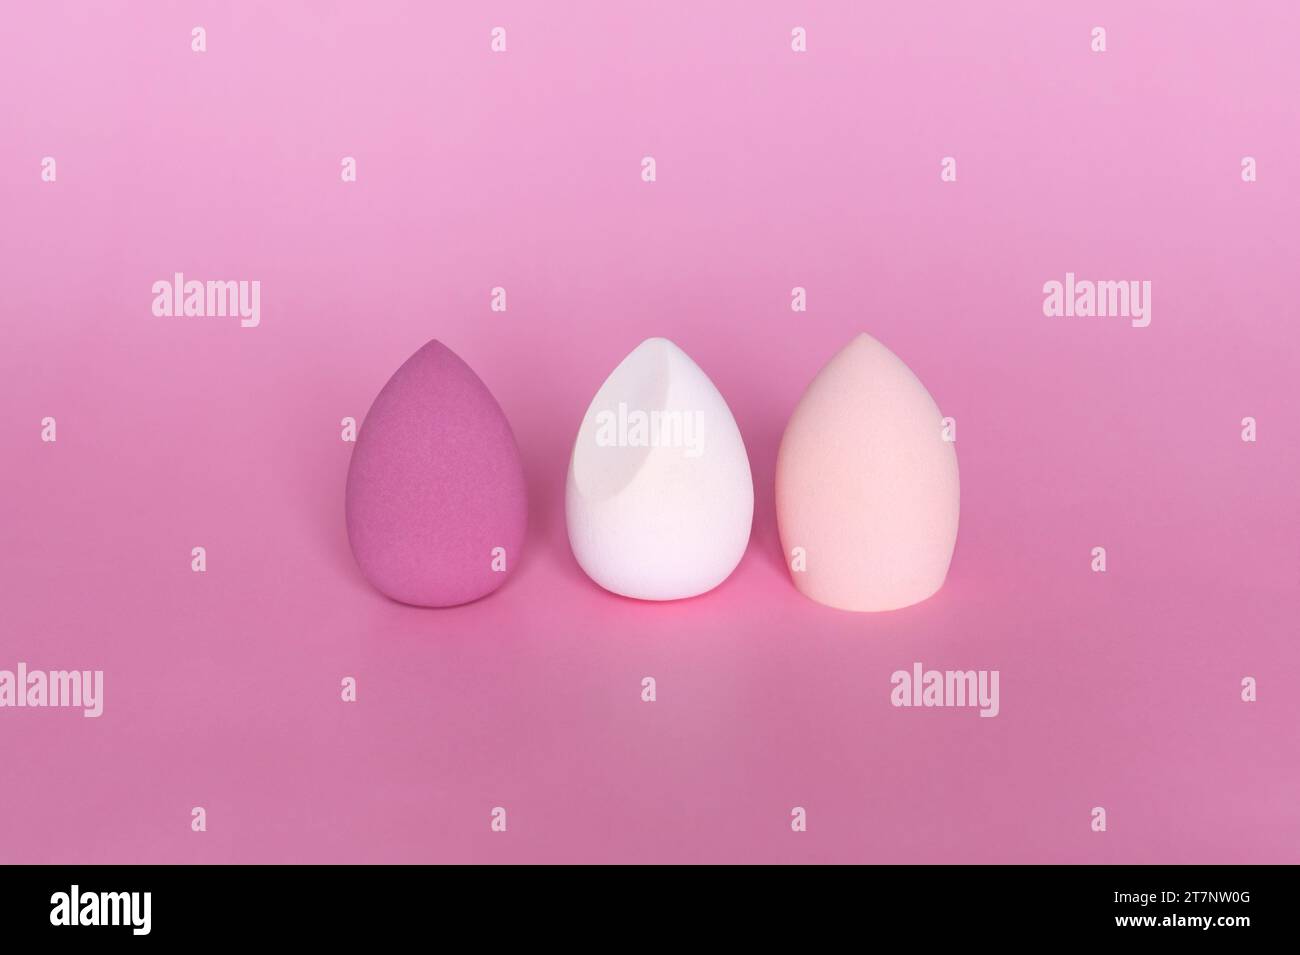 Three colorful beauty blenders or makeup sponges on pink background. Cosmetic tool concept. Stock Photo